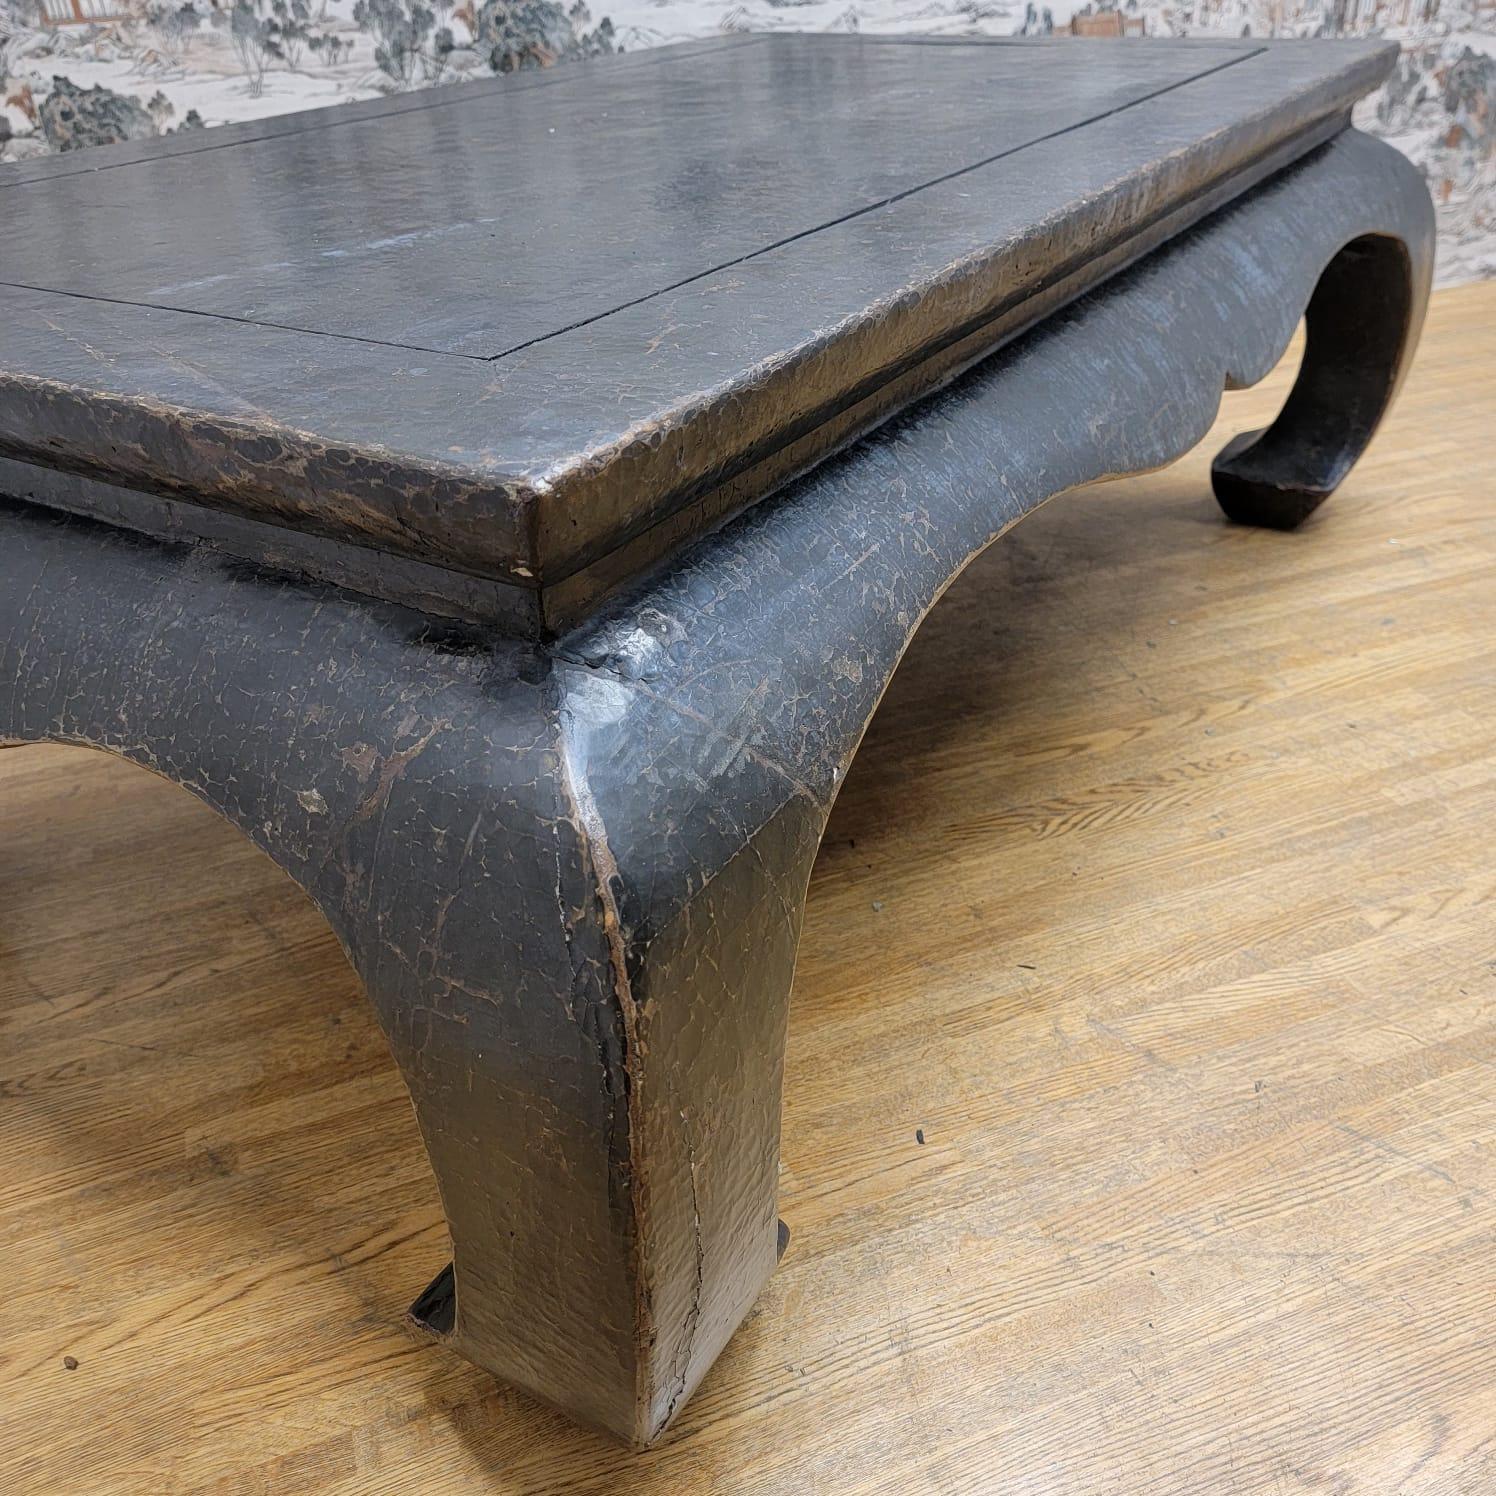 Antique Shanxi Province Linen Wrapped Lacquered Elm Kang Style Coffee Table

Circa: 1900

Dimensions:

W: 50